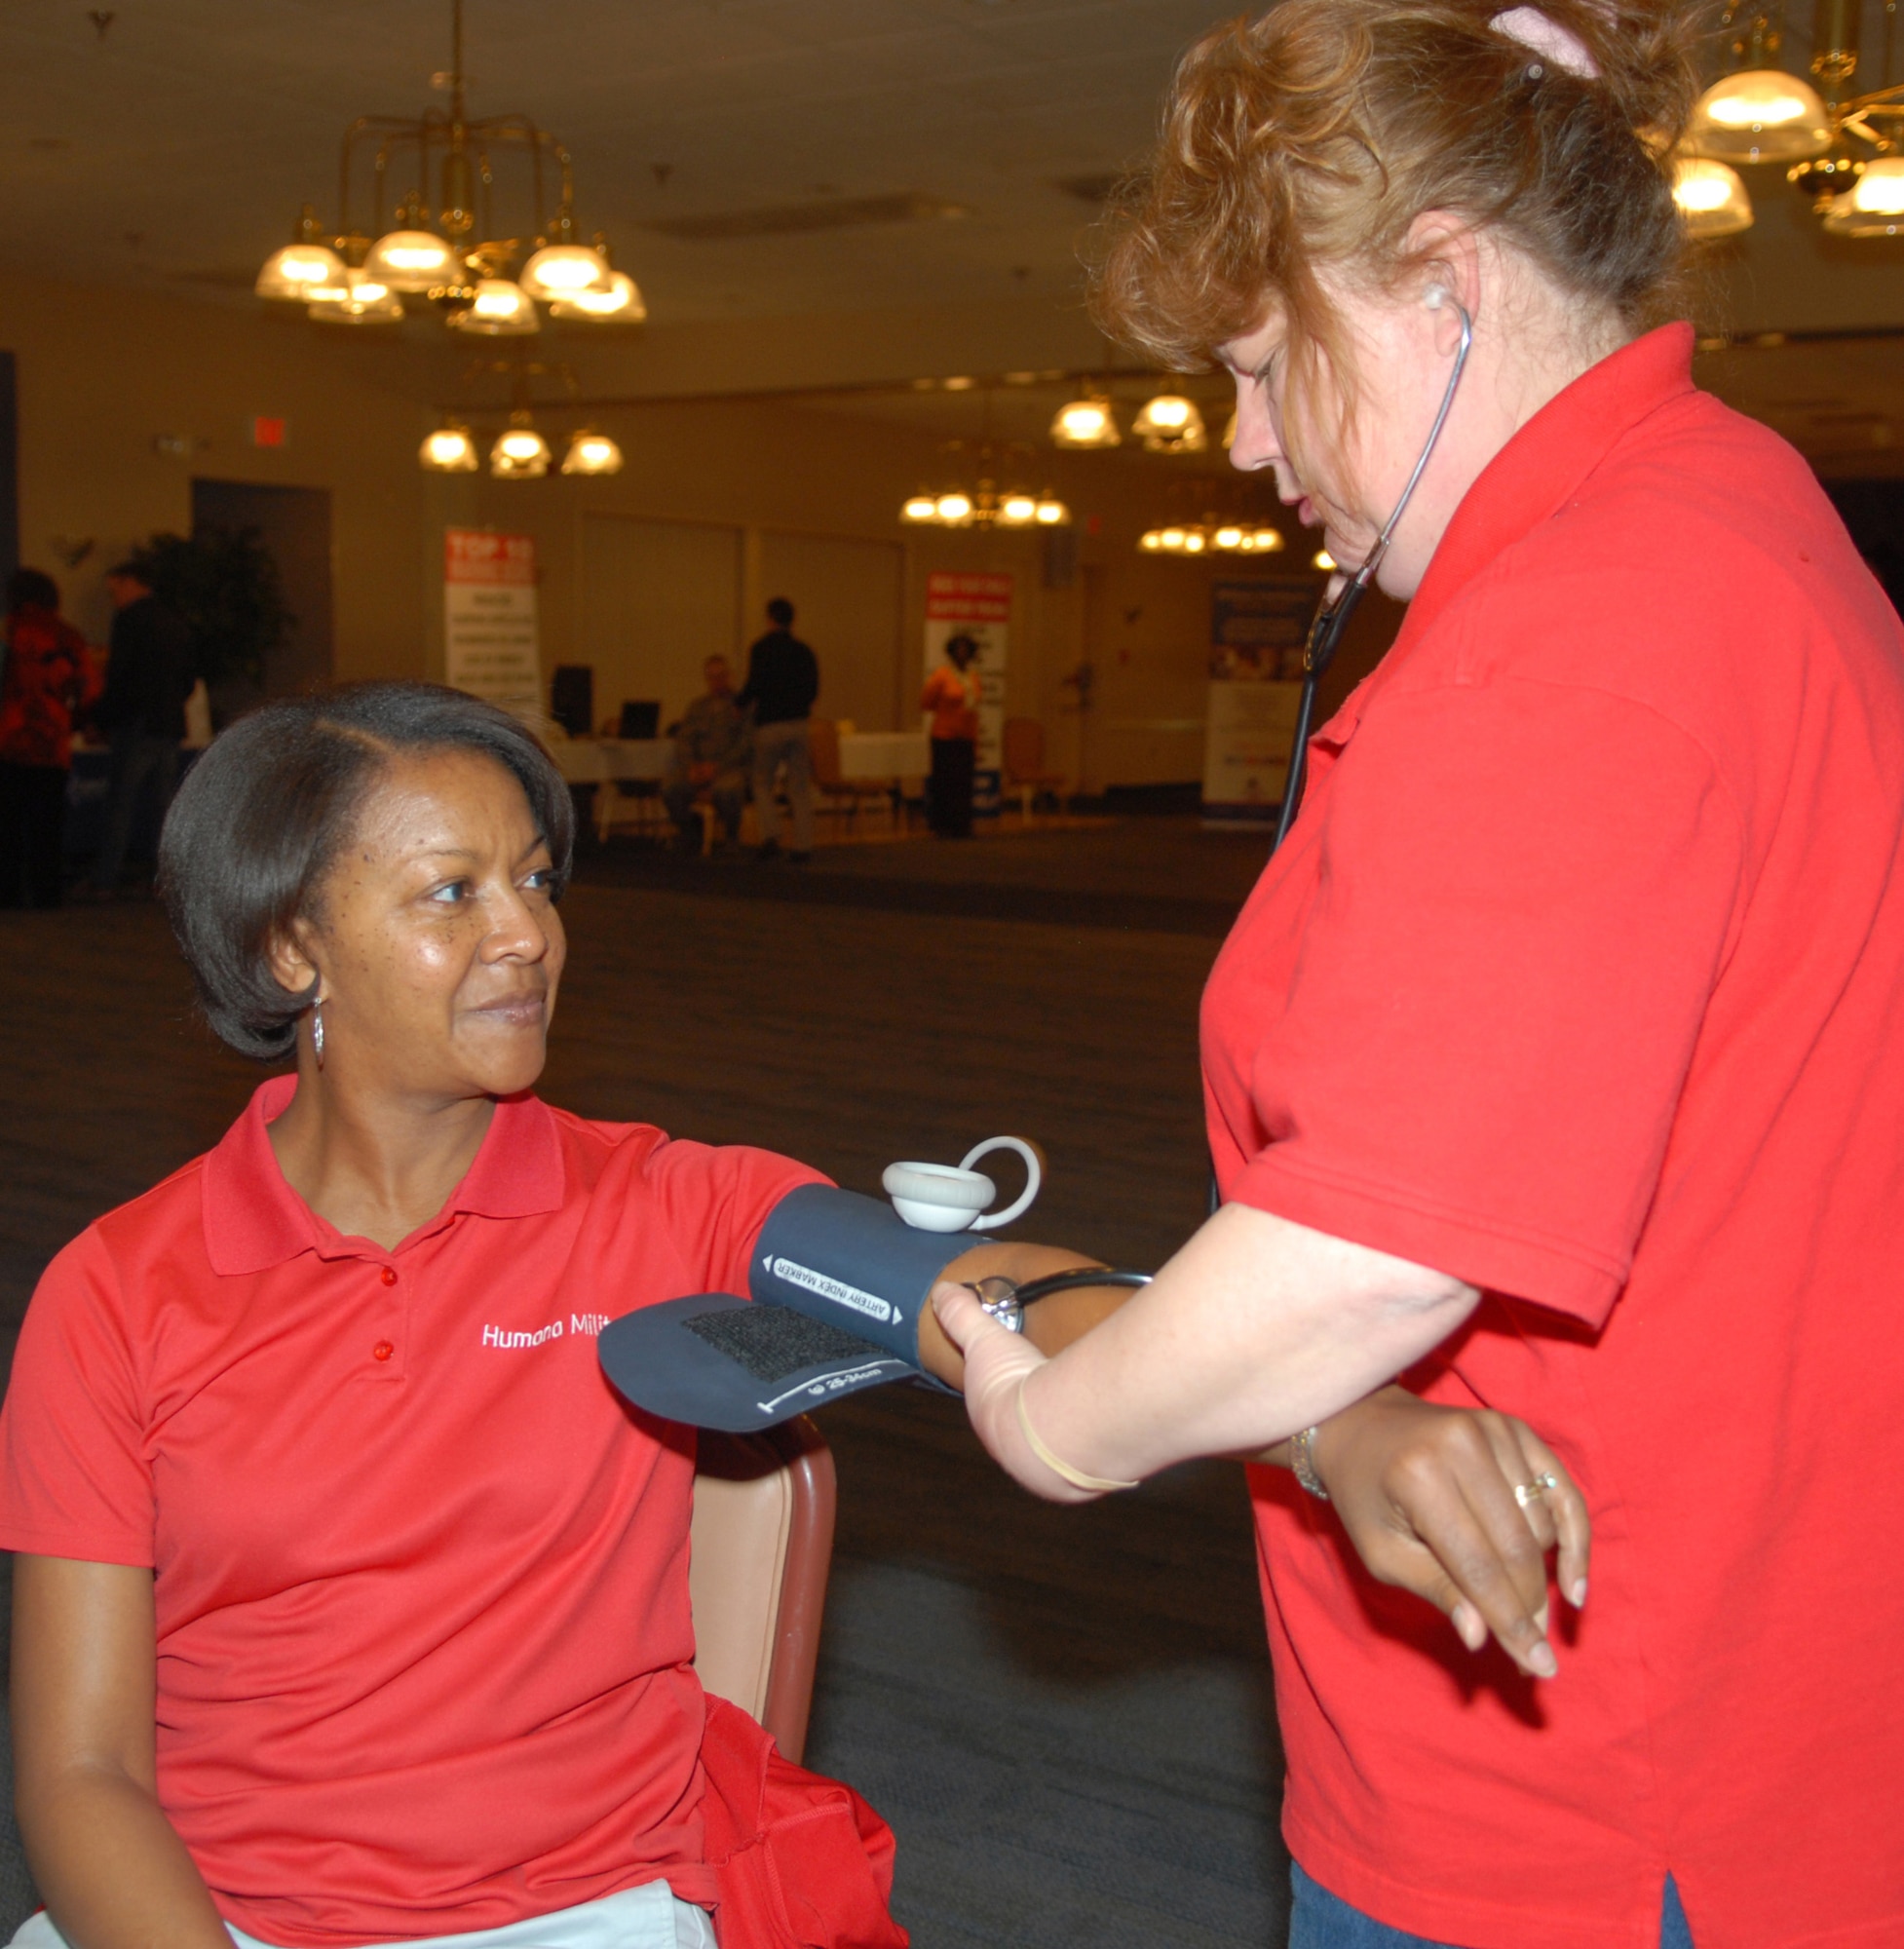 Angela Hawkins, Tricare representative, has her blood pressure checked by Kelley Denny, Civilian Health Promotions Services coordinator, as part of her Cardiac Risk Profile at last
year’s Healthy Heart Fair. February is National Heart Health Month and CHPS will be available at locations base wide throughout the month to answer questions about heart disease and other wellness concerns. (U.S. Air Force photo by Misuzu Allen)